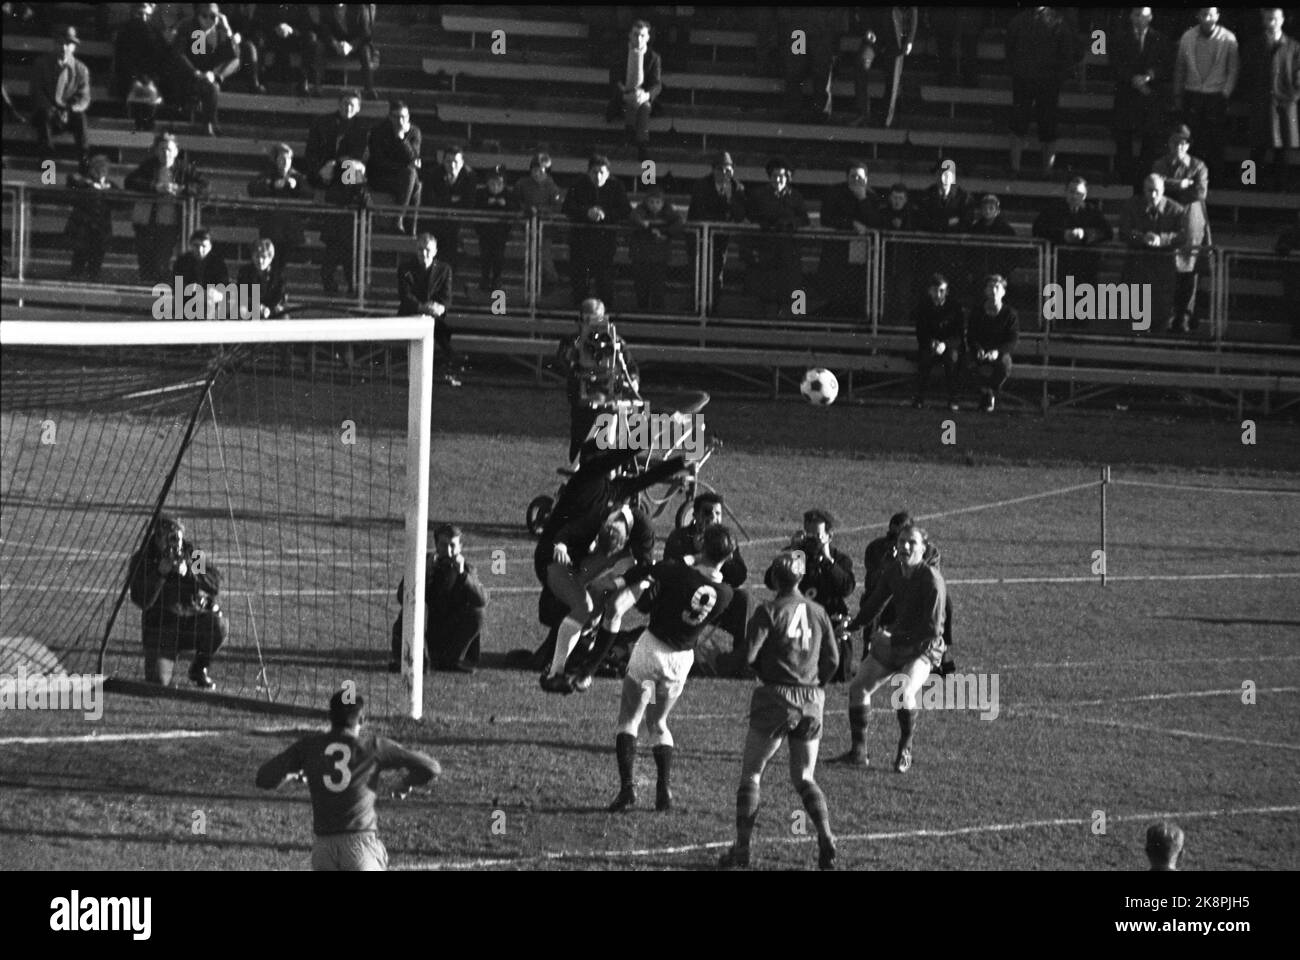 Oslo, 19651024. Ullevaal Stadium. Skeid - Frigg 2-2. Cup final in football. This is from the first match. Photo: Arild Hordnes / NTB / NTB Stock Photo